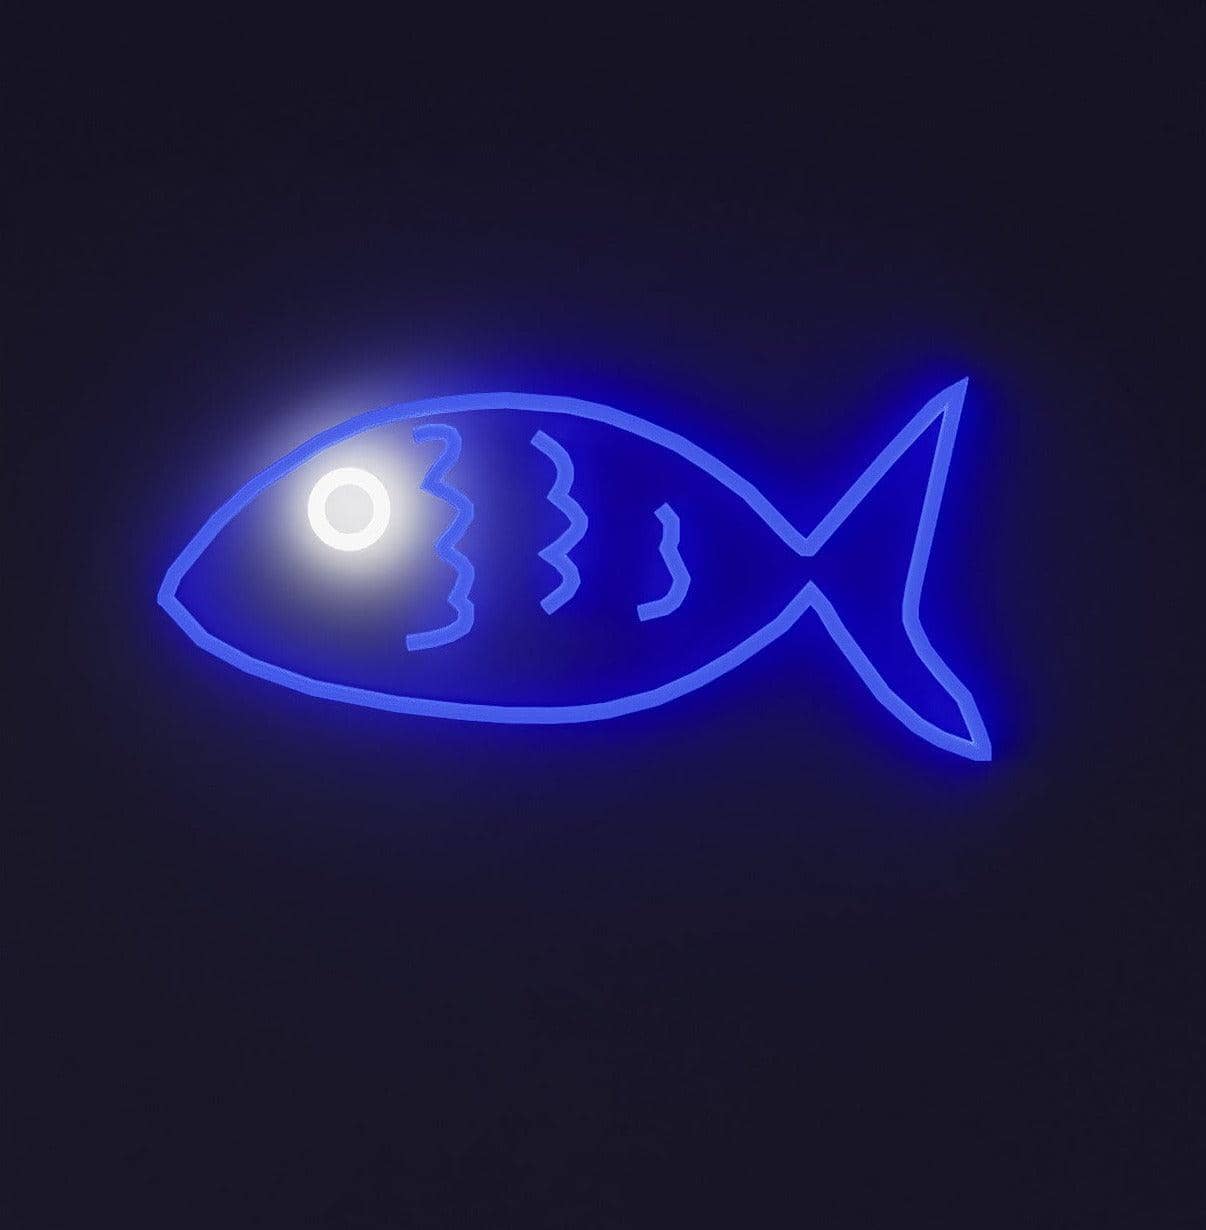 light-up-neon-lights-and-hang-them-in-your-bedroom-for-display-fishy-friend-blue